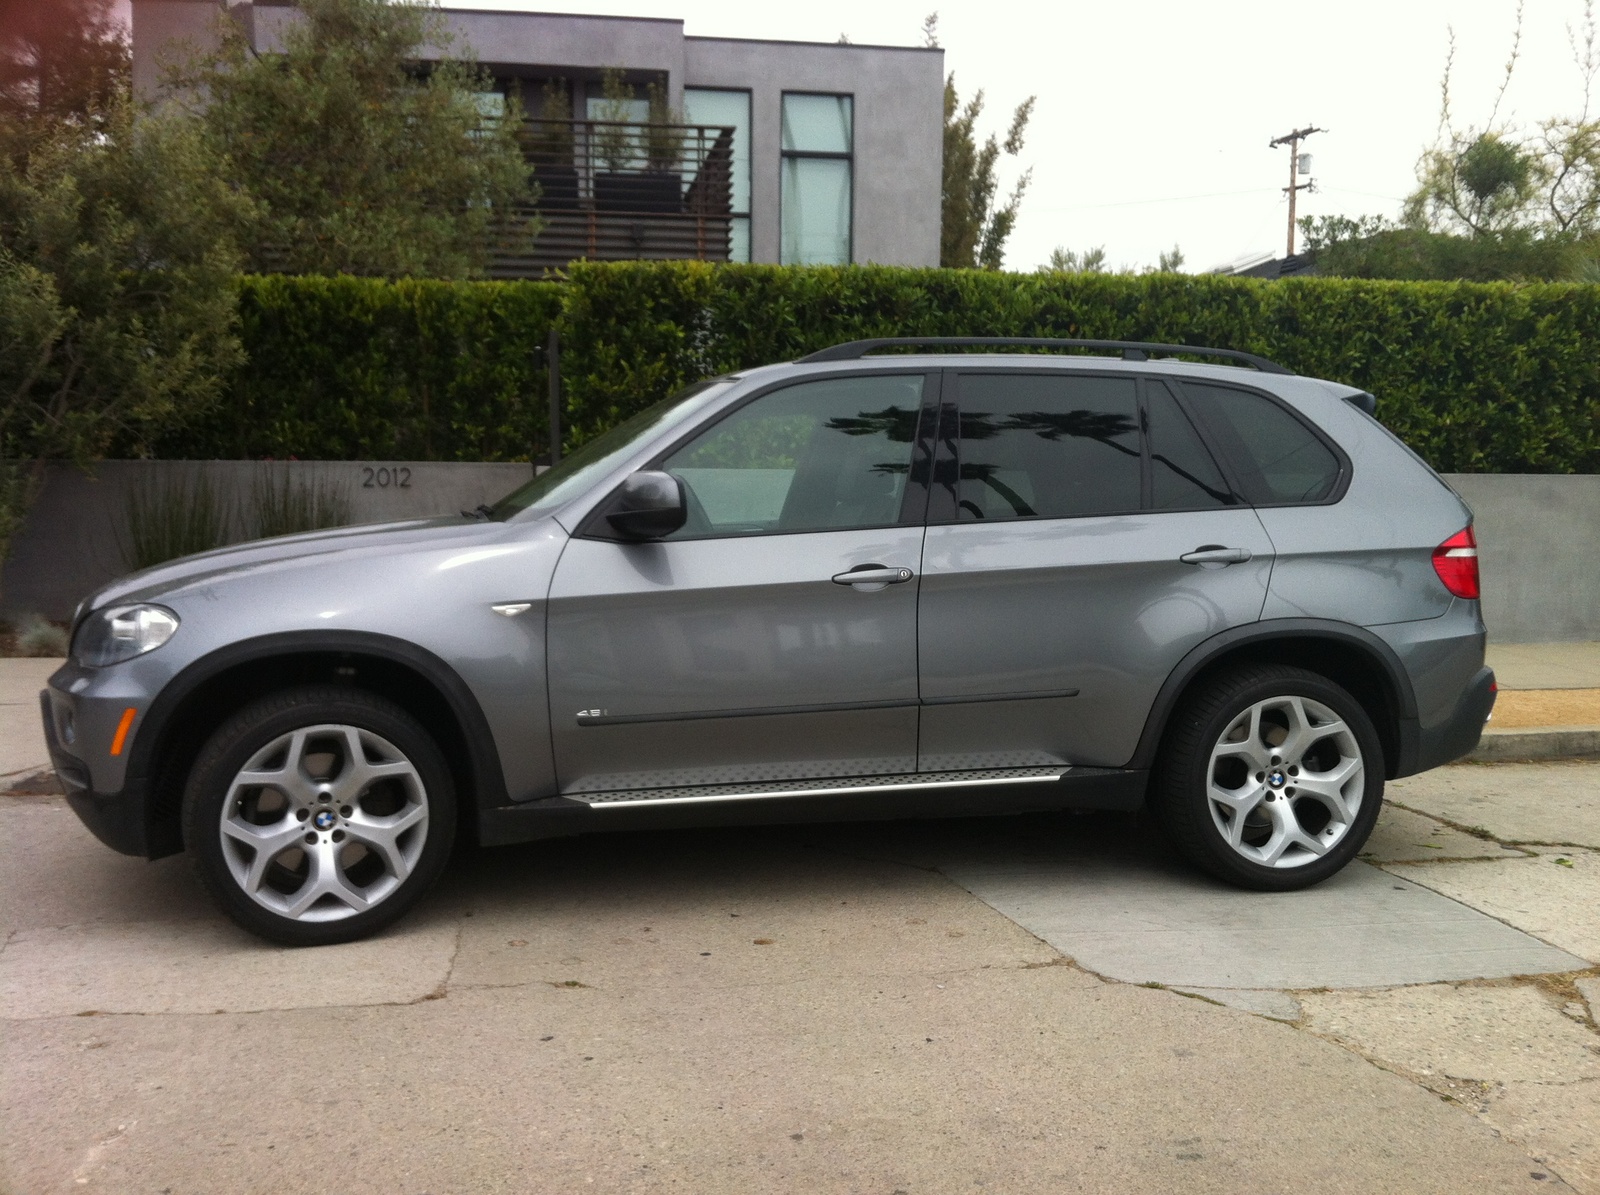 2008 Bmw x5 4.8i review